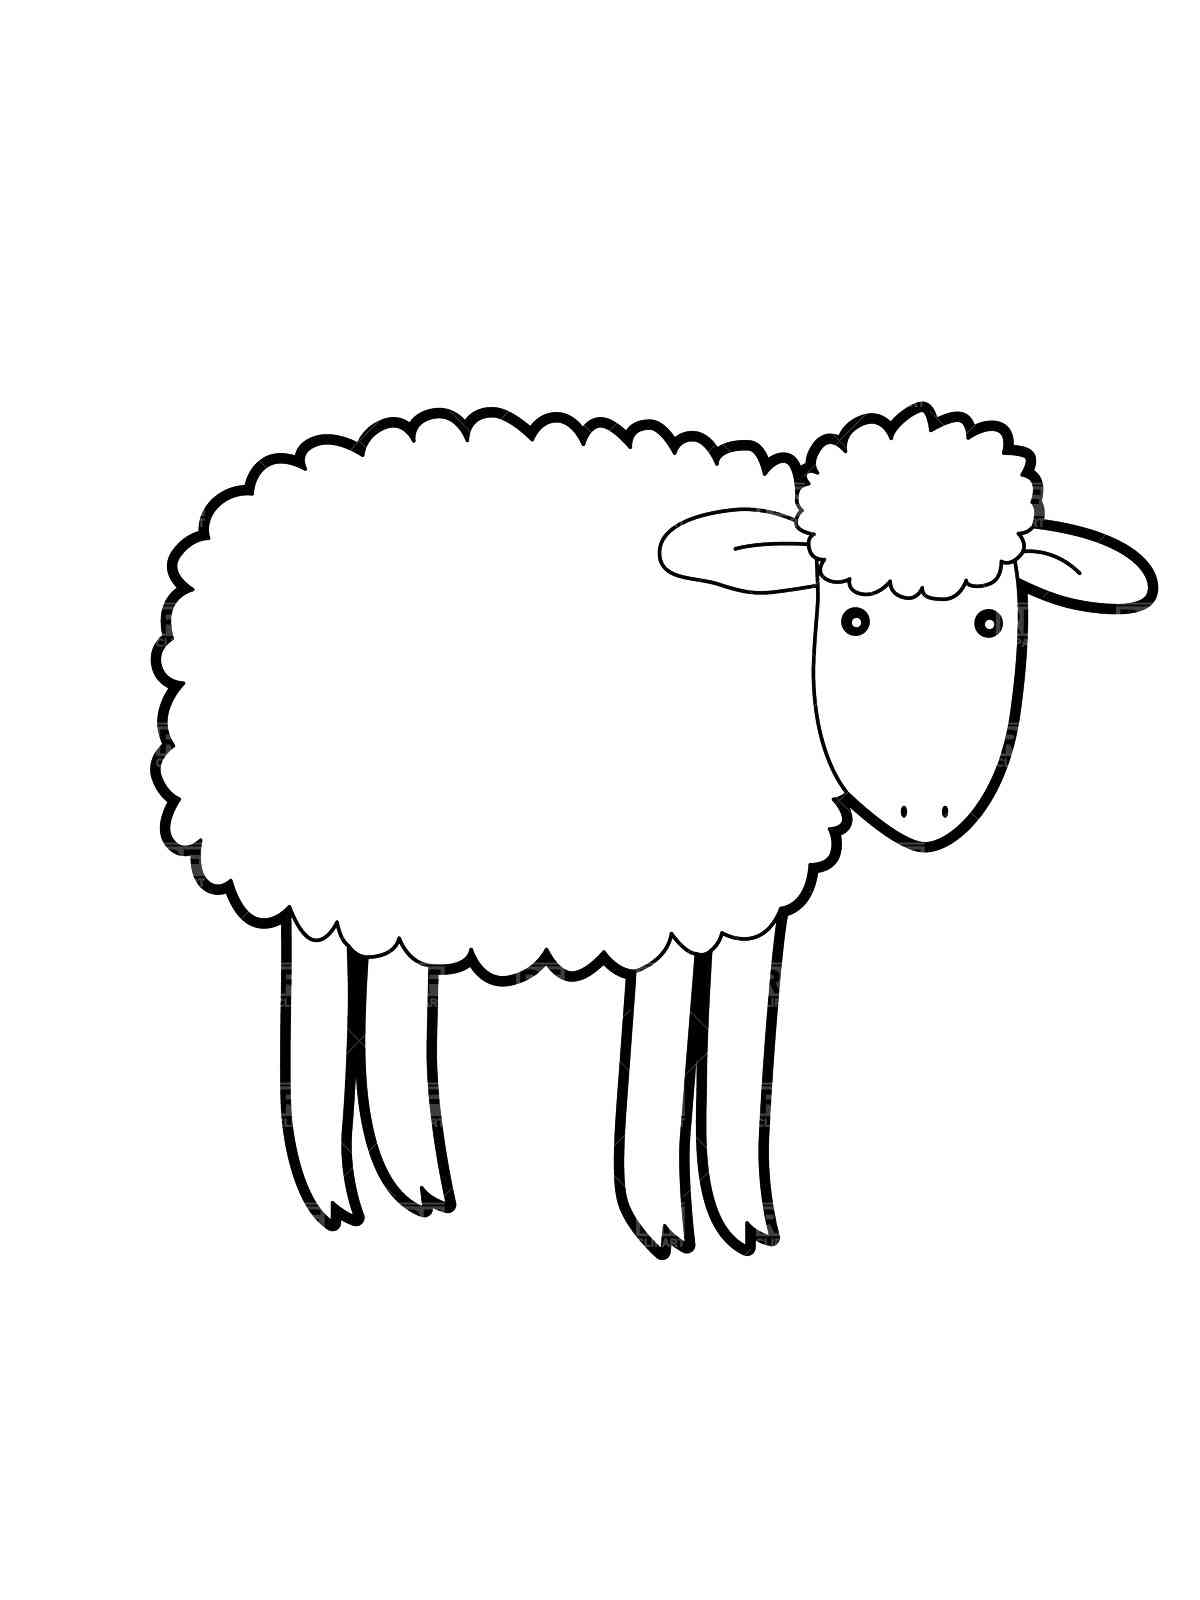 Easy Sheep coloring page